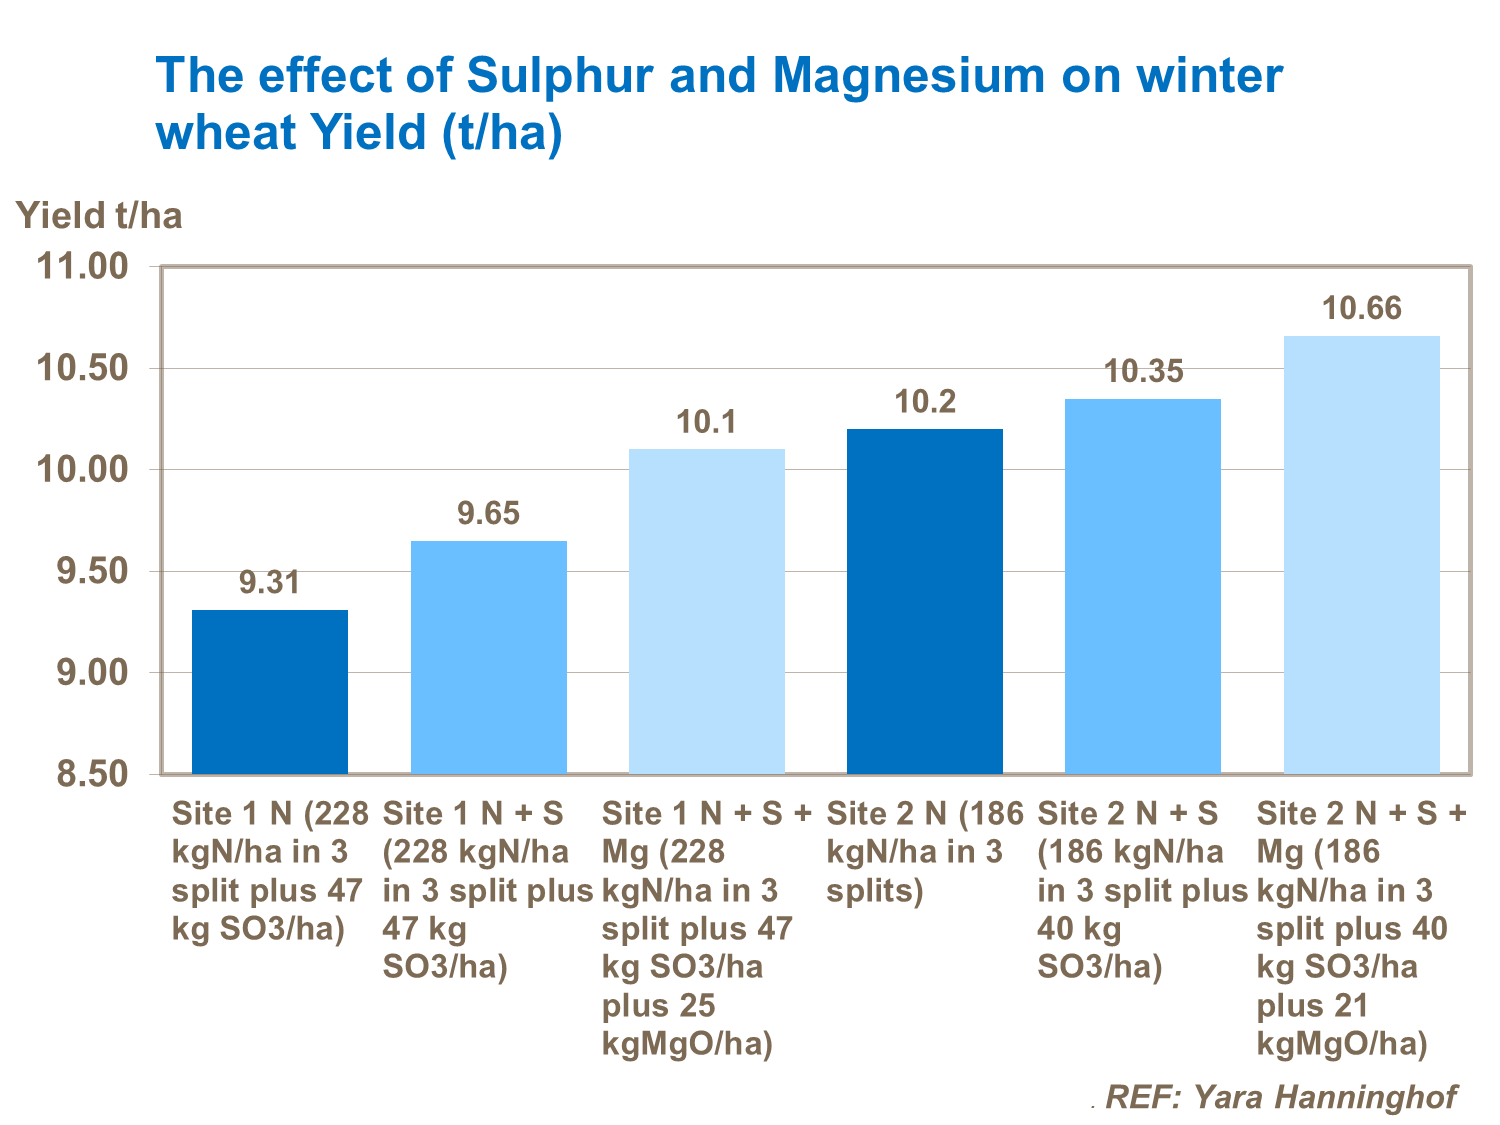 The effect of Sulphur and Magnesium on winter wheat Yield